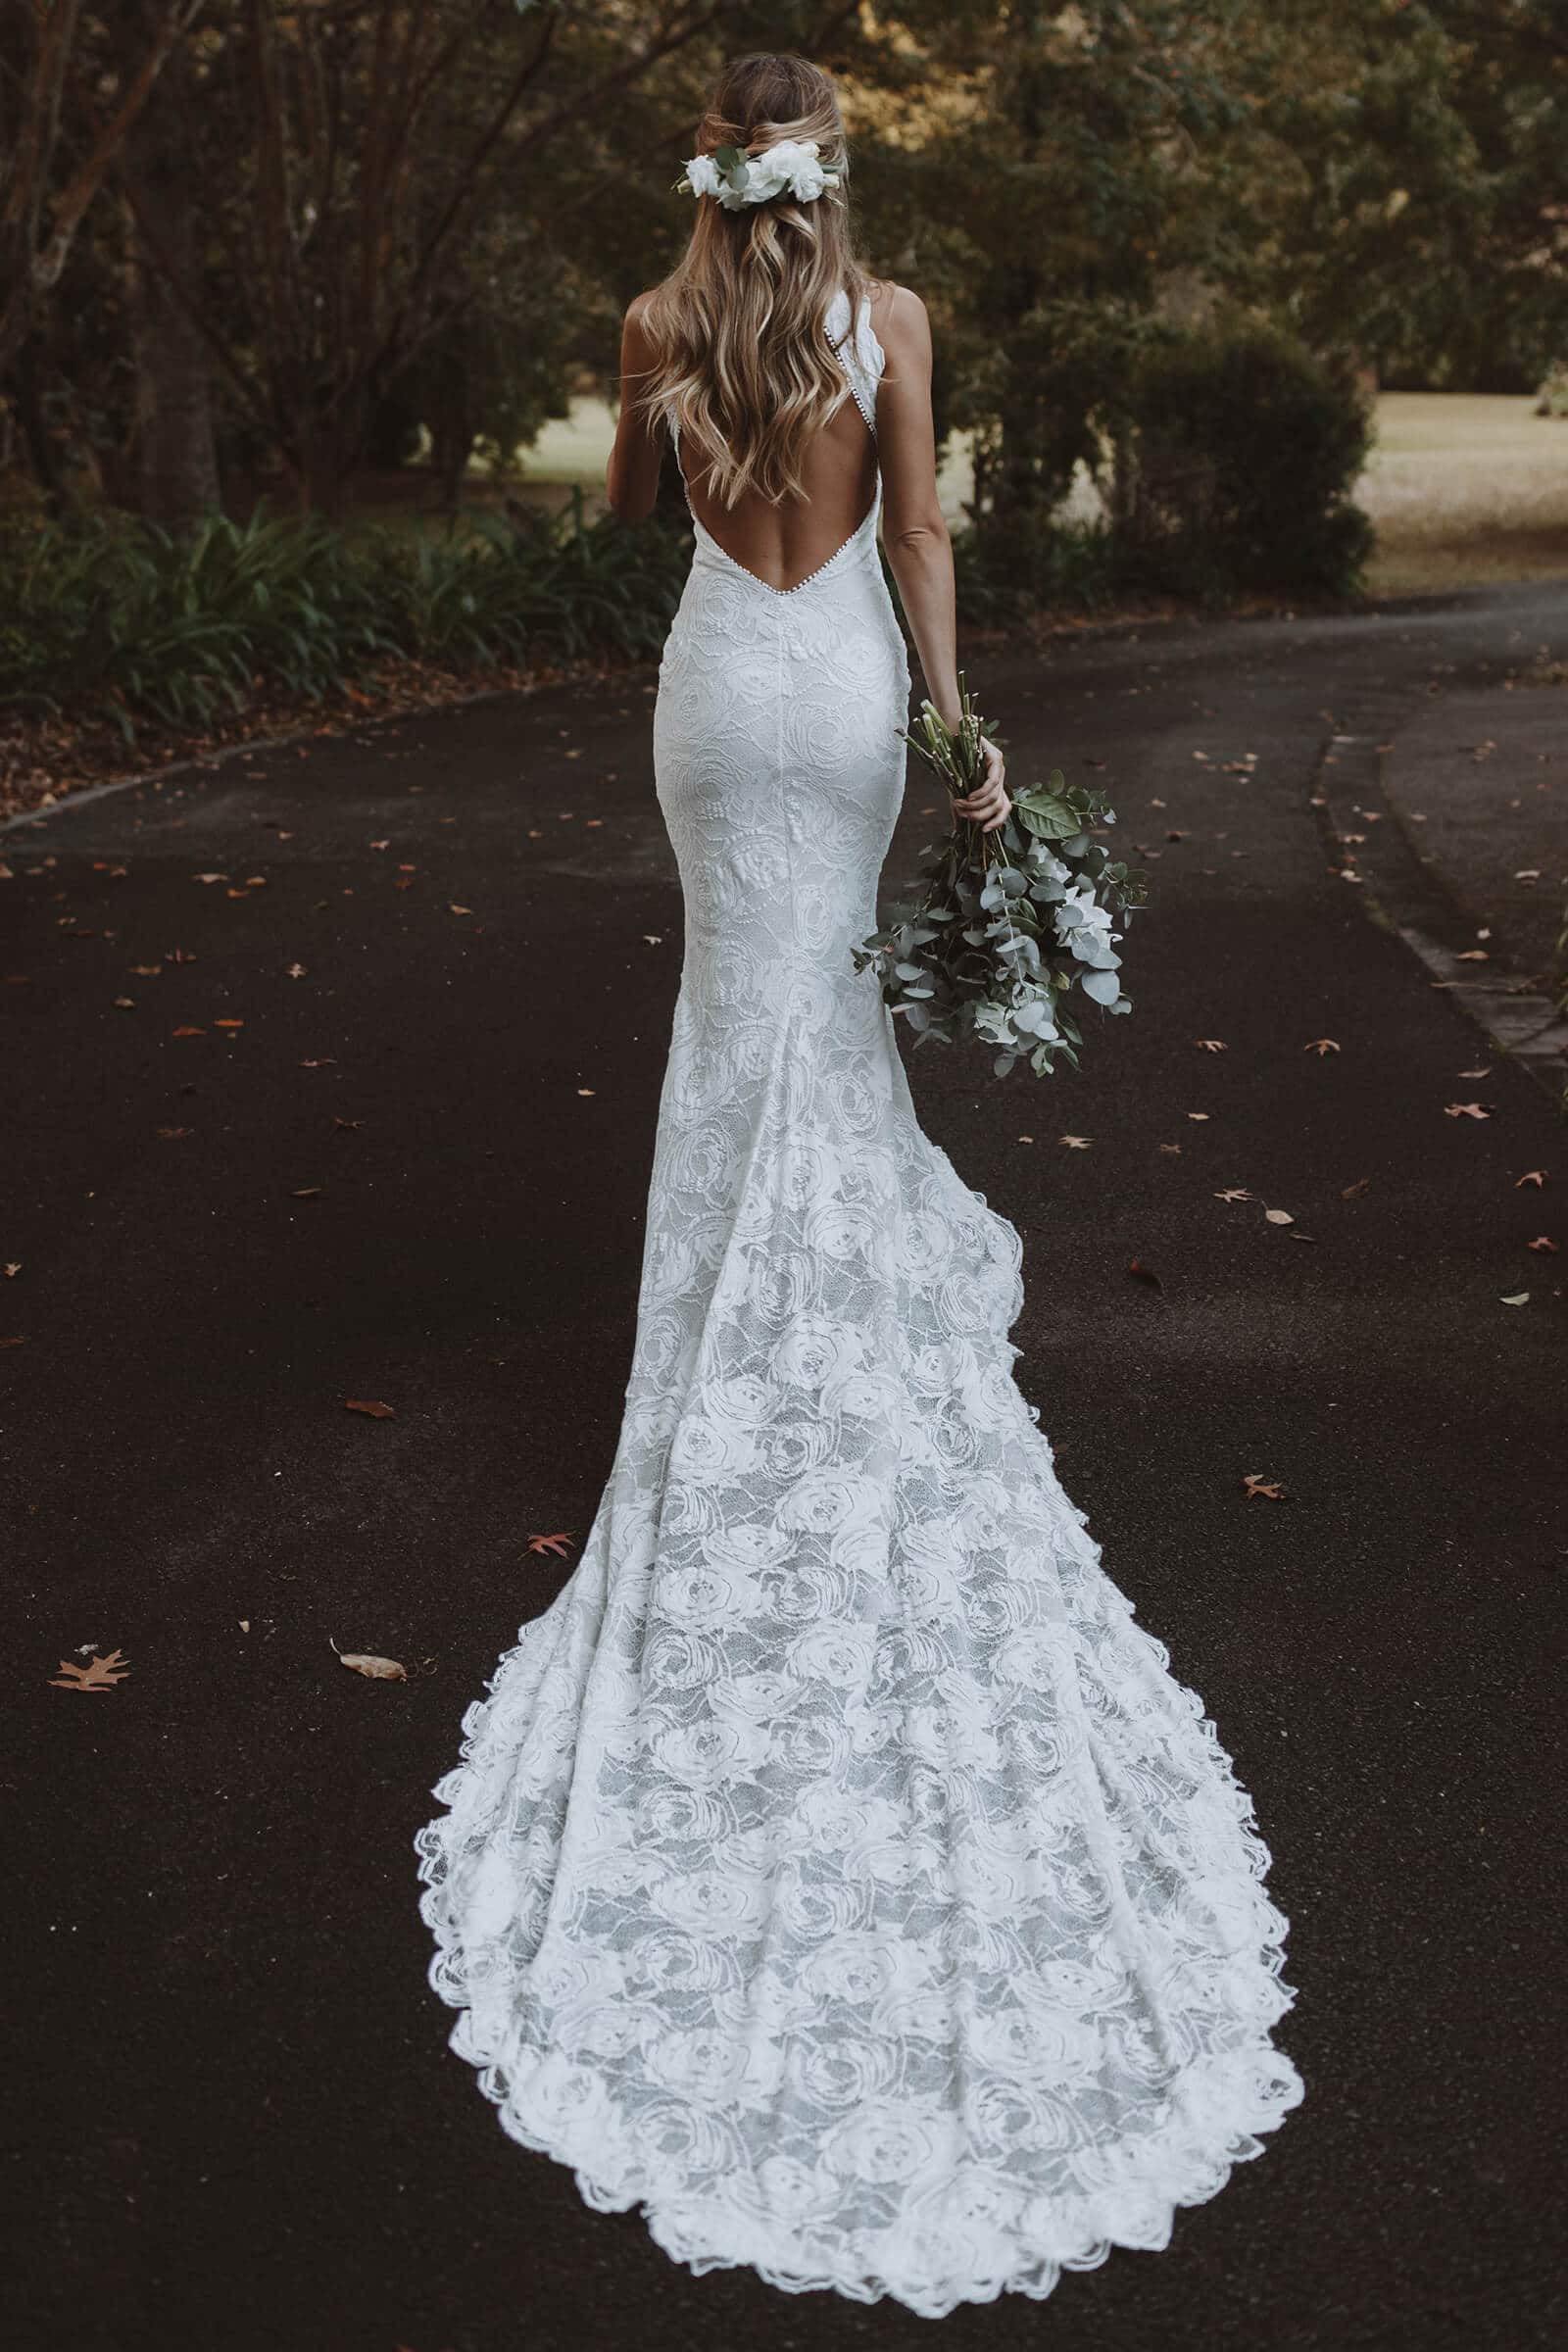 Beautiful Lace Dresses To Wear To A Wedding Online